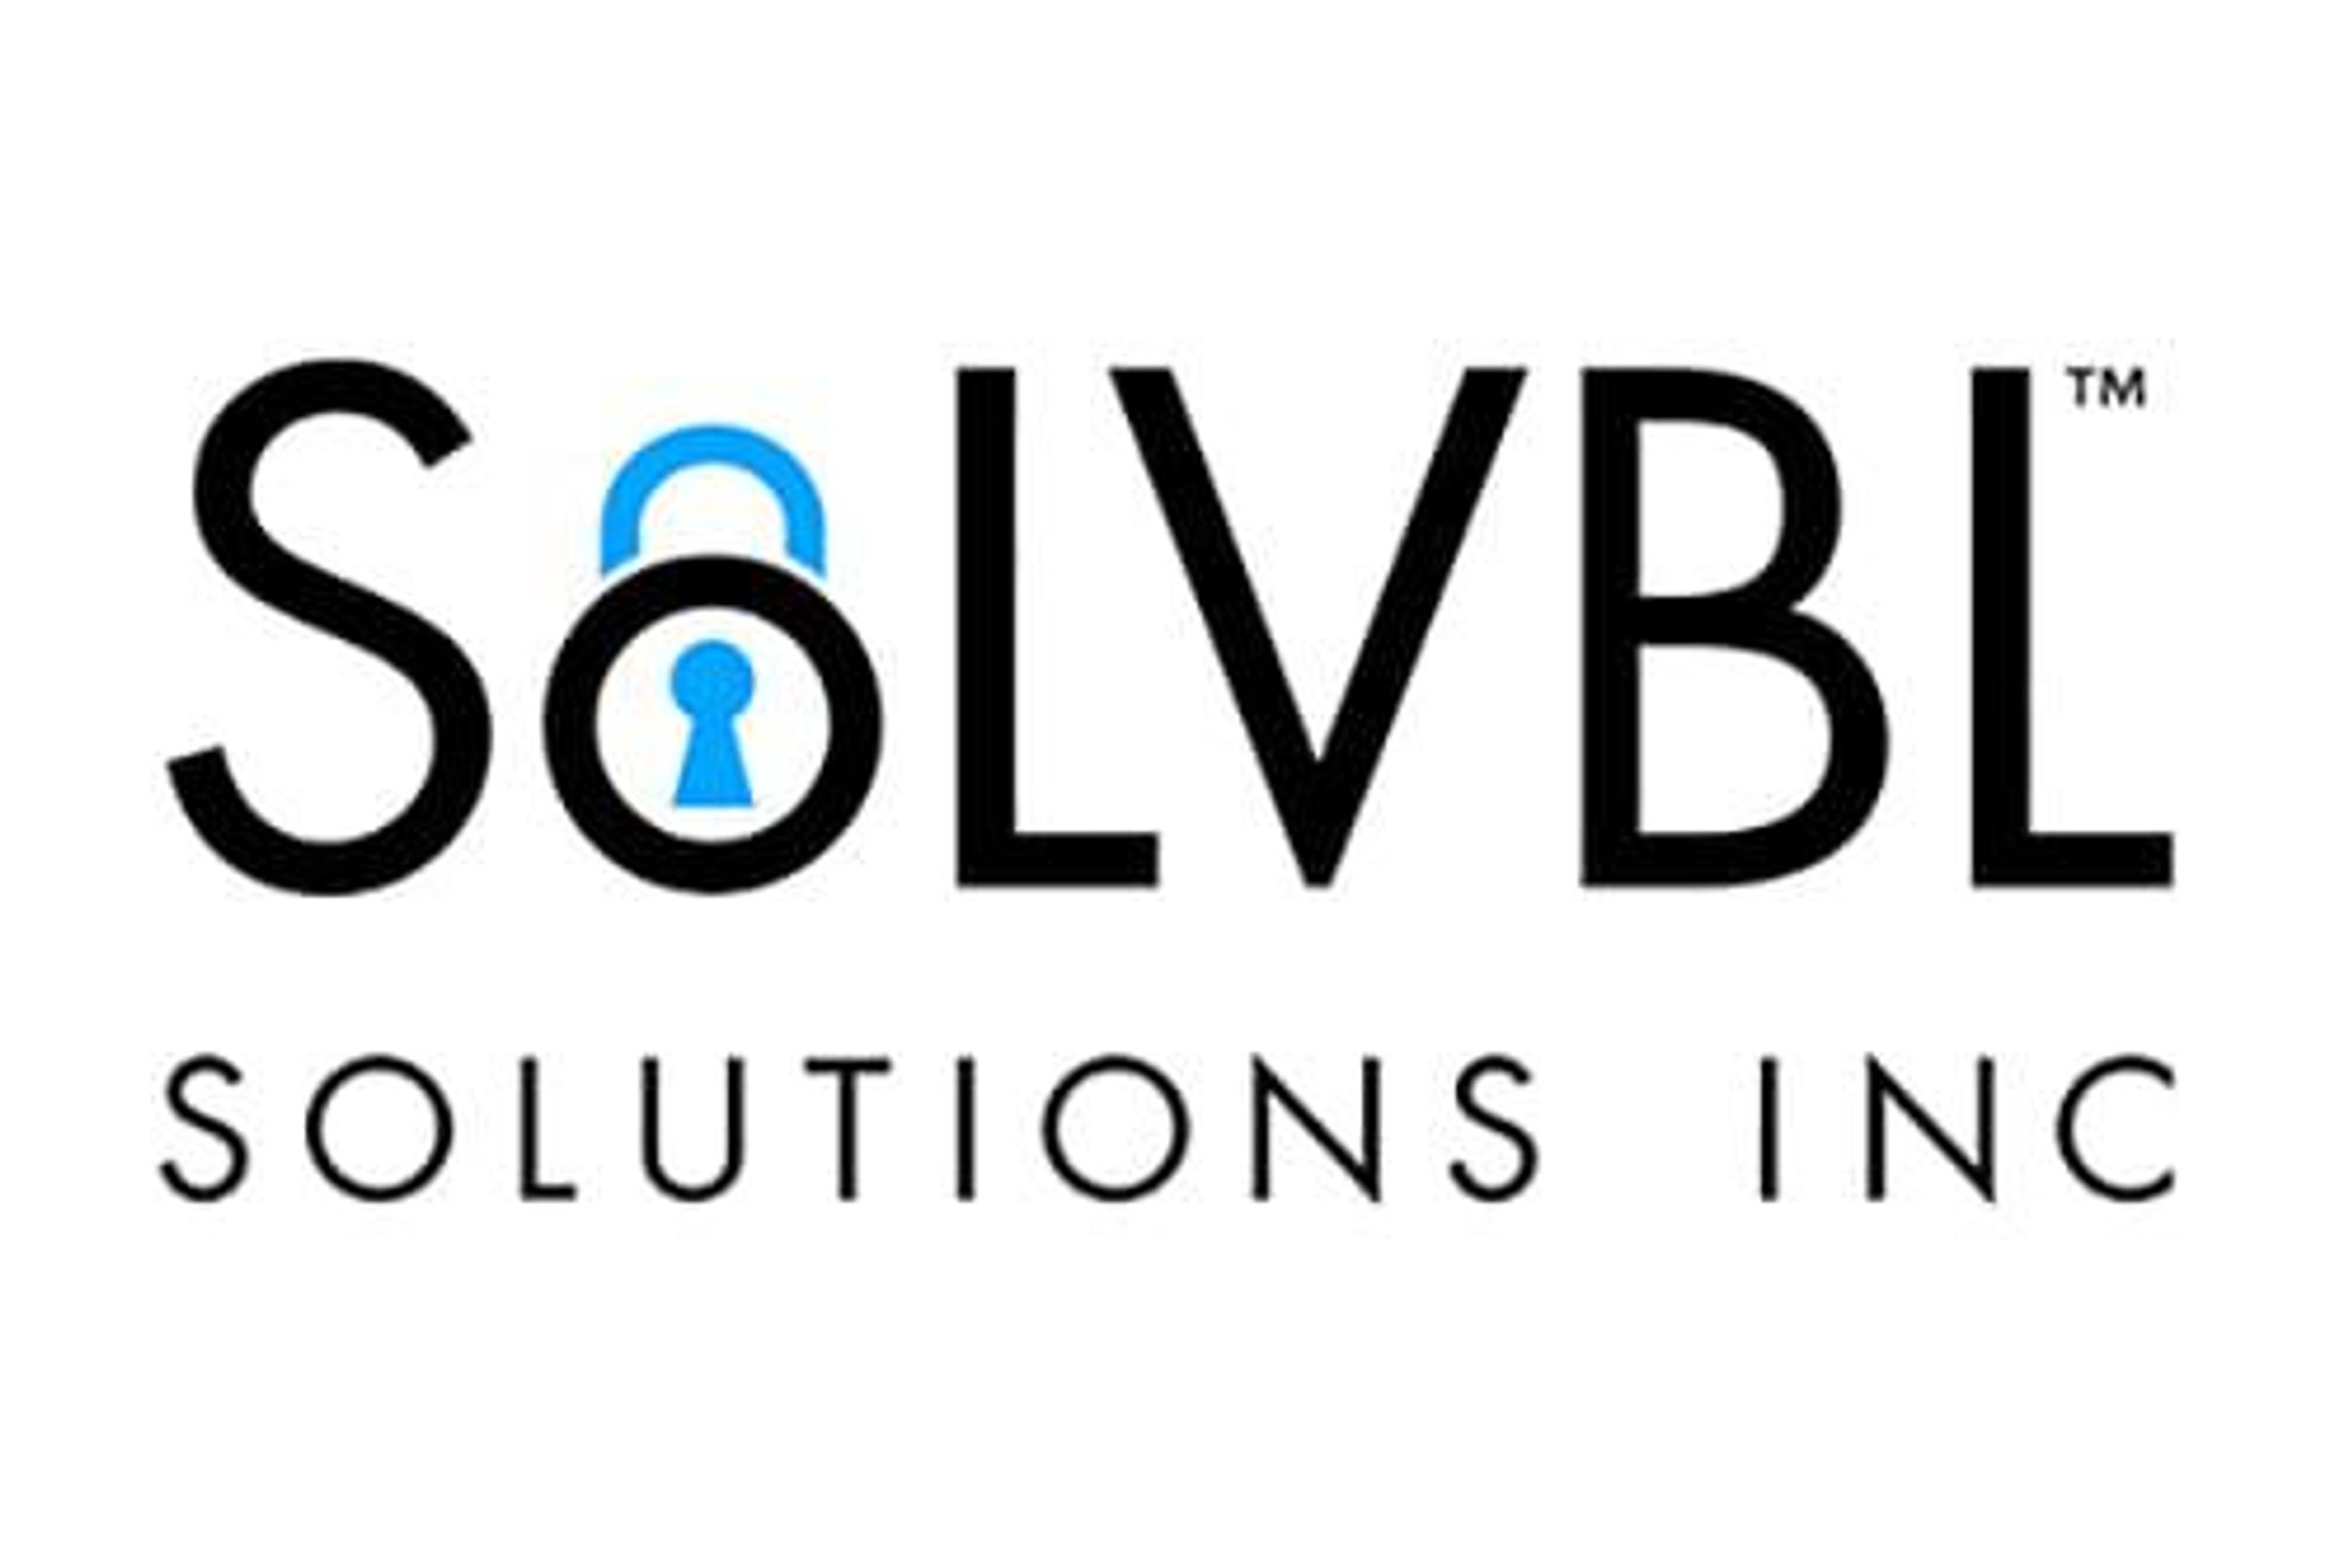 SoLVBL Solutions Inc. Clarifies News Release Disseminated on April 19, 2022 Related to SoLVBL Solutions' Signing of Referral Agreement with Jet Digital Inc